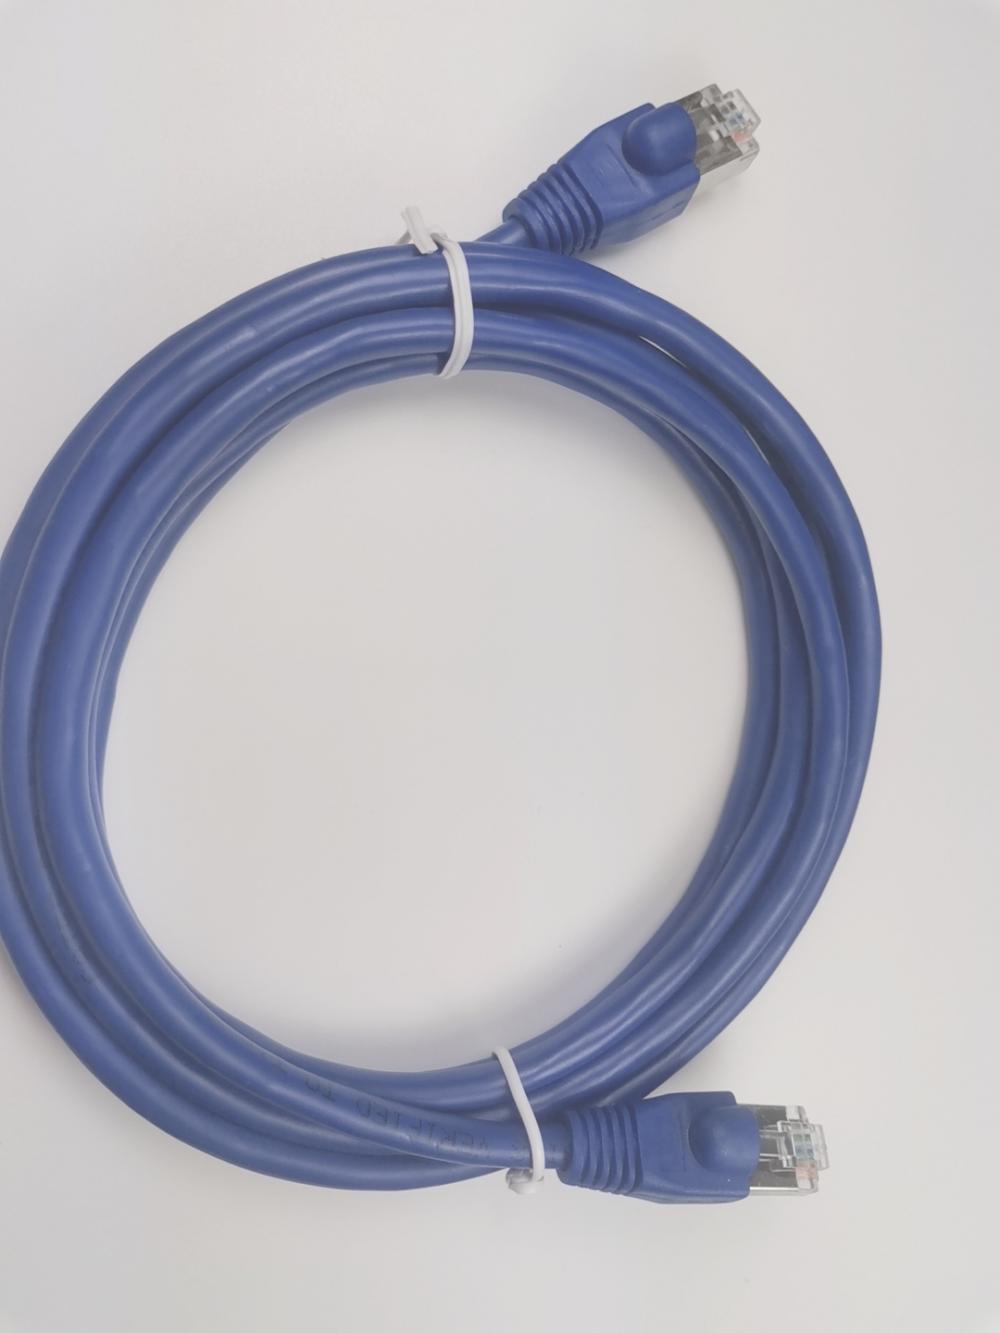 Cat7 Ethernet Patch Lan Cable for Router Modem